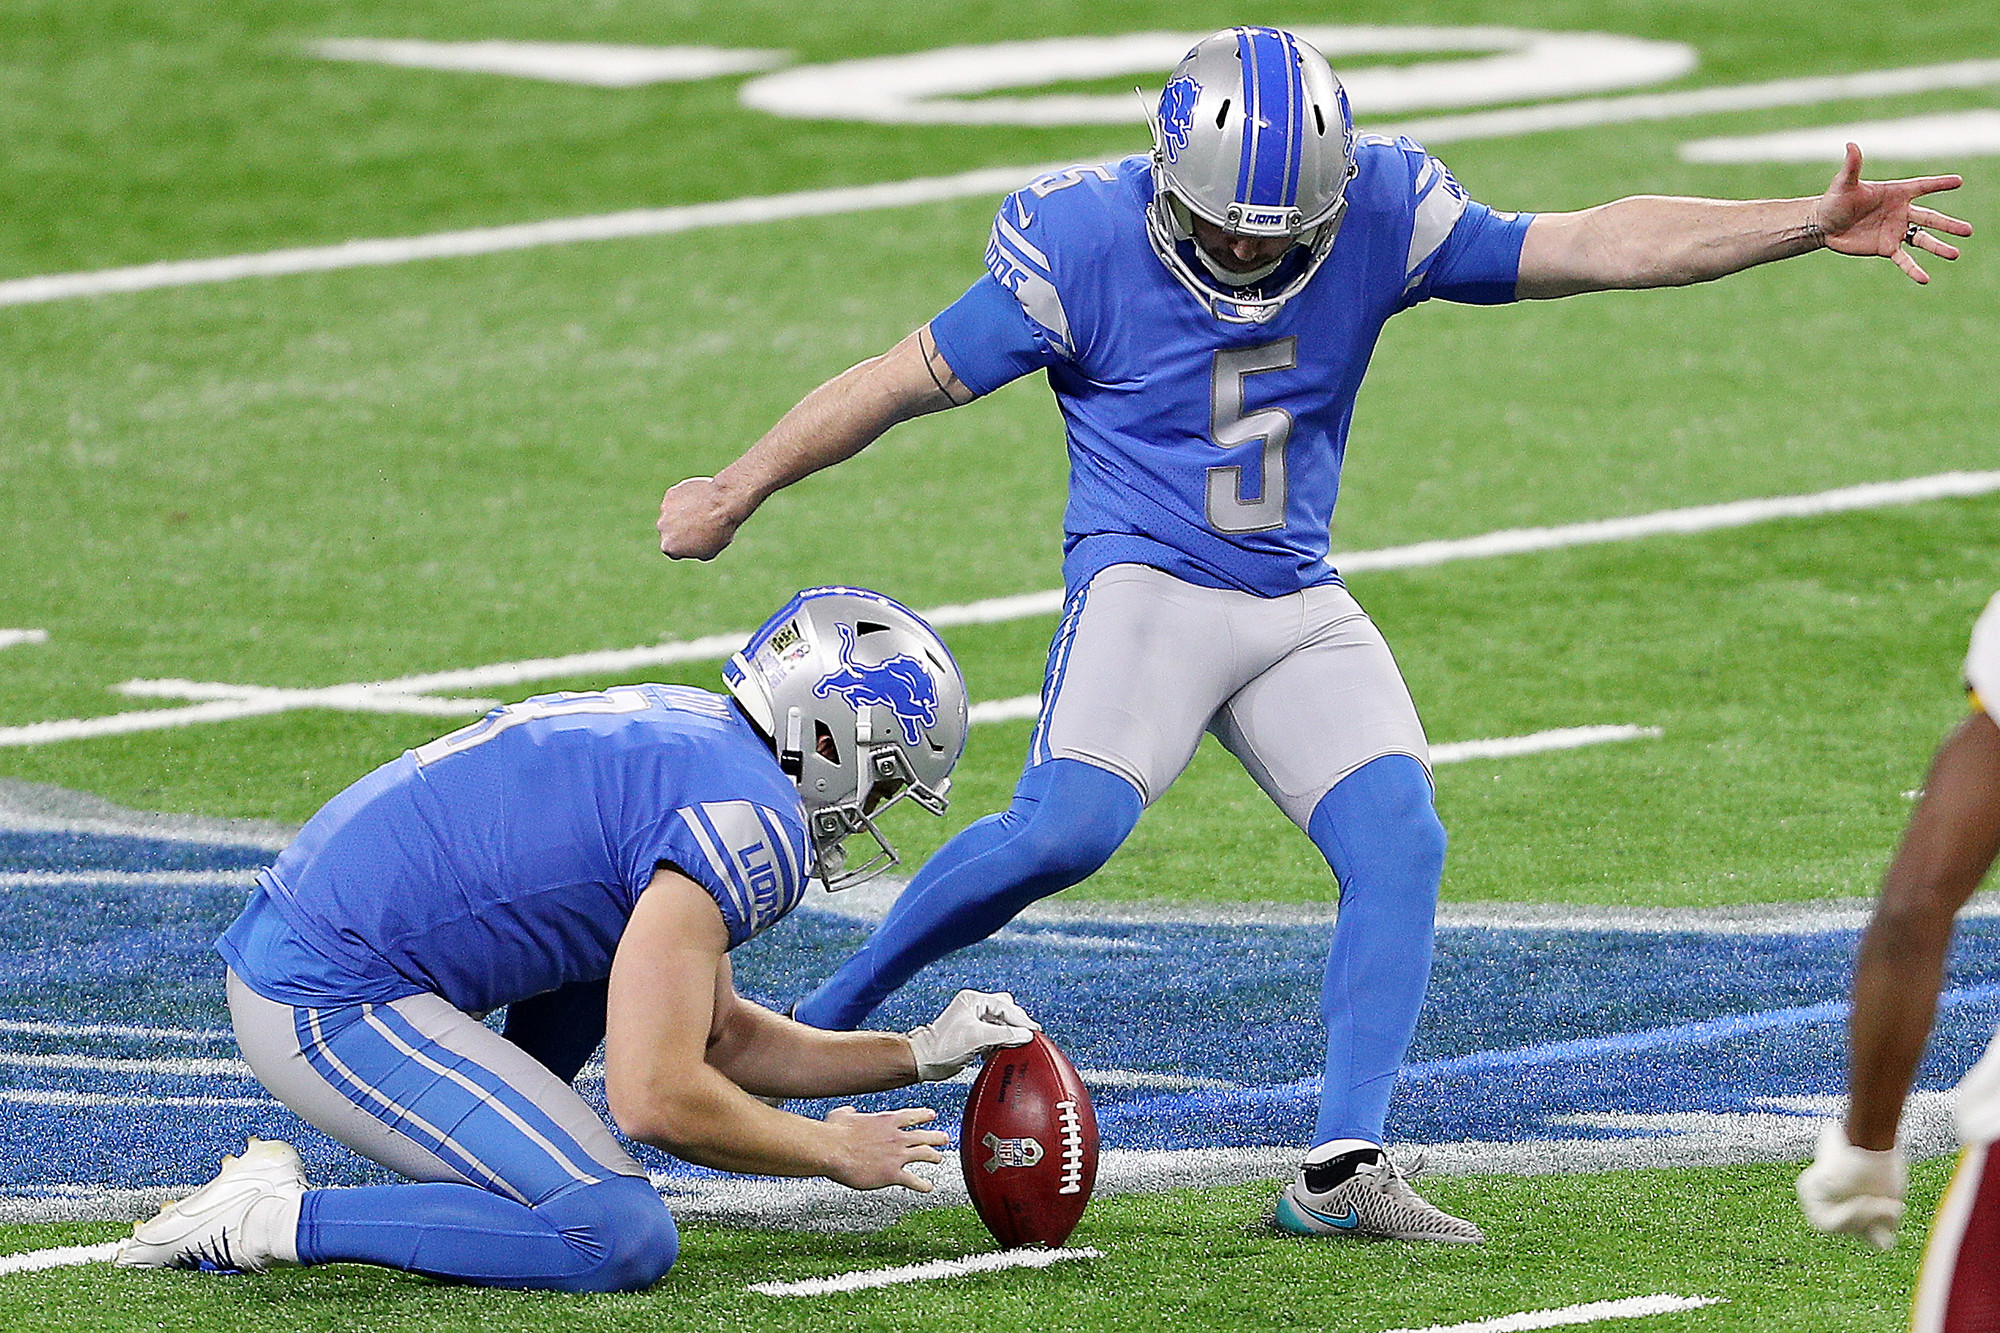 Pending Lions free agent Matt Prater plans to play in 2021